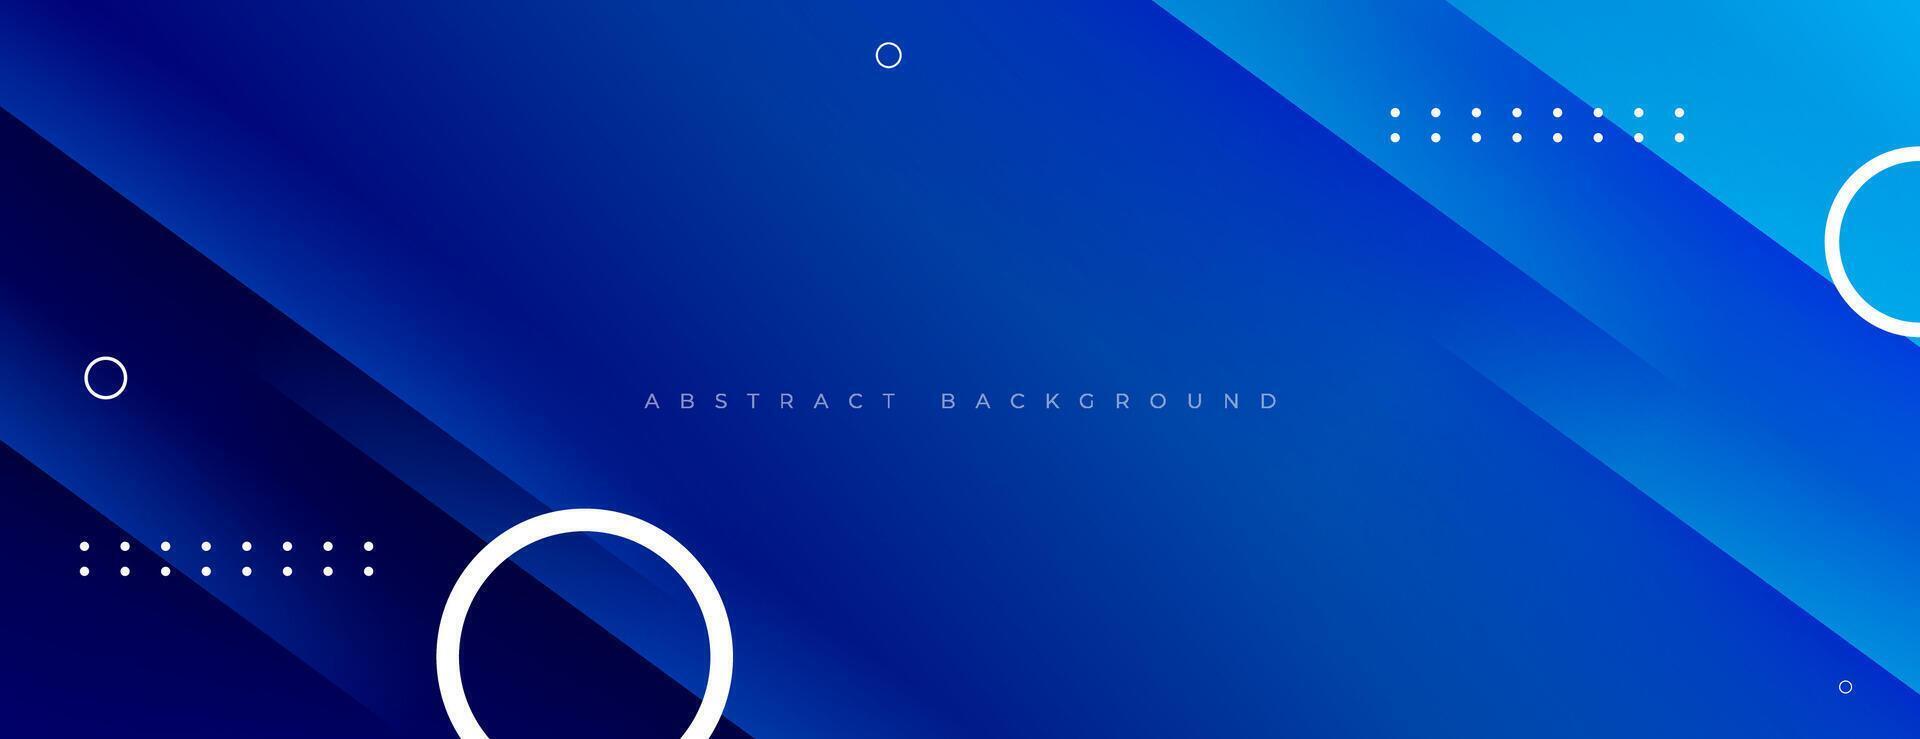 blue geometric background with lines and circle shapes for banner, web, presentation, wallpaper, etc. vector